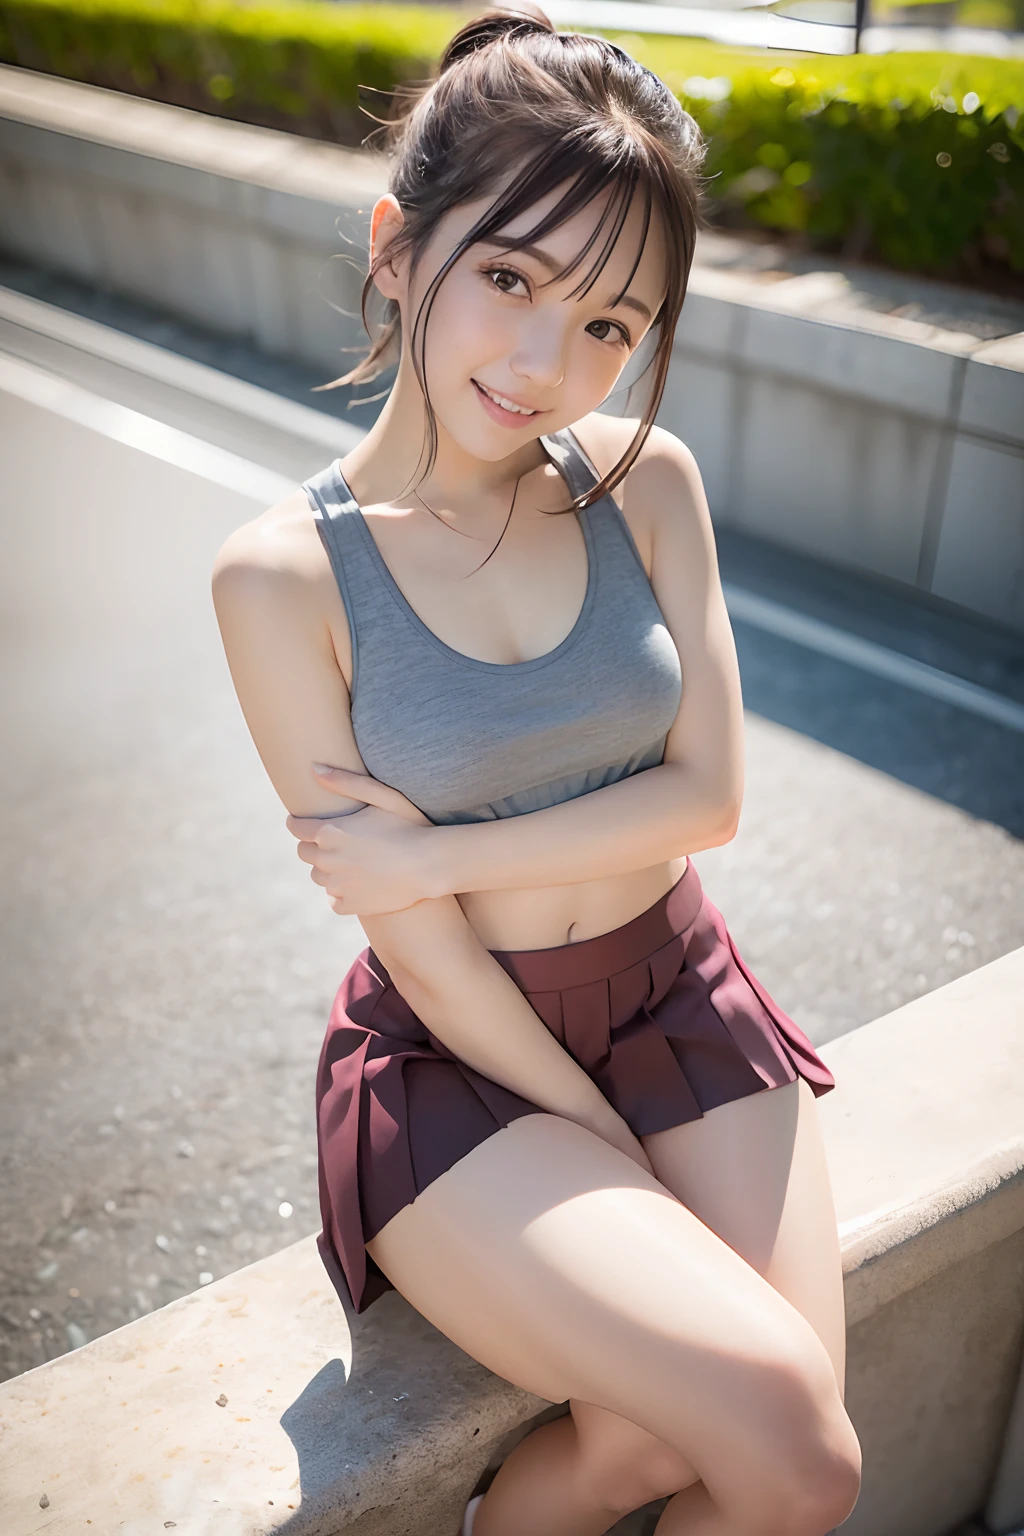 (Highest image quality, Highest image quality, Super A High Definition), (Raw photo, Realism 1.4), Chest pulled togethene skin, Fine face, Cute, AKB Girl, Girl in her 20s, Same as, Perfect Skin, thighs thighs thighs thighs, Medium Hair, Perfect, Brown hair, Brown eyes, Whole body, Sit on the steps of the footbridge、hugging own legs、Legs hugging themselves、I can see the panties.、((Tank Tops)), ((Ultra Mini Pleated Skirt))、pantie shot、Bright sunlight, Smile、Bokeh background、Wet tank top、arms folded、bra very